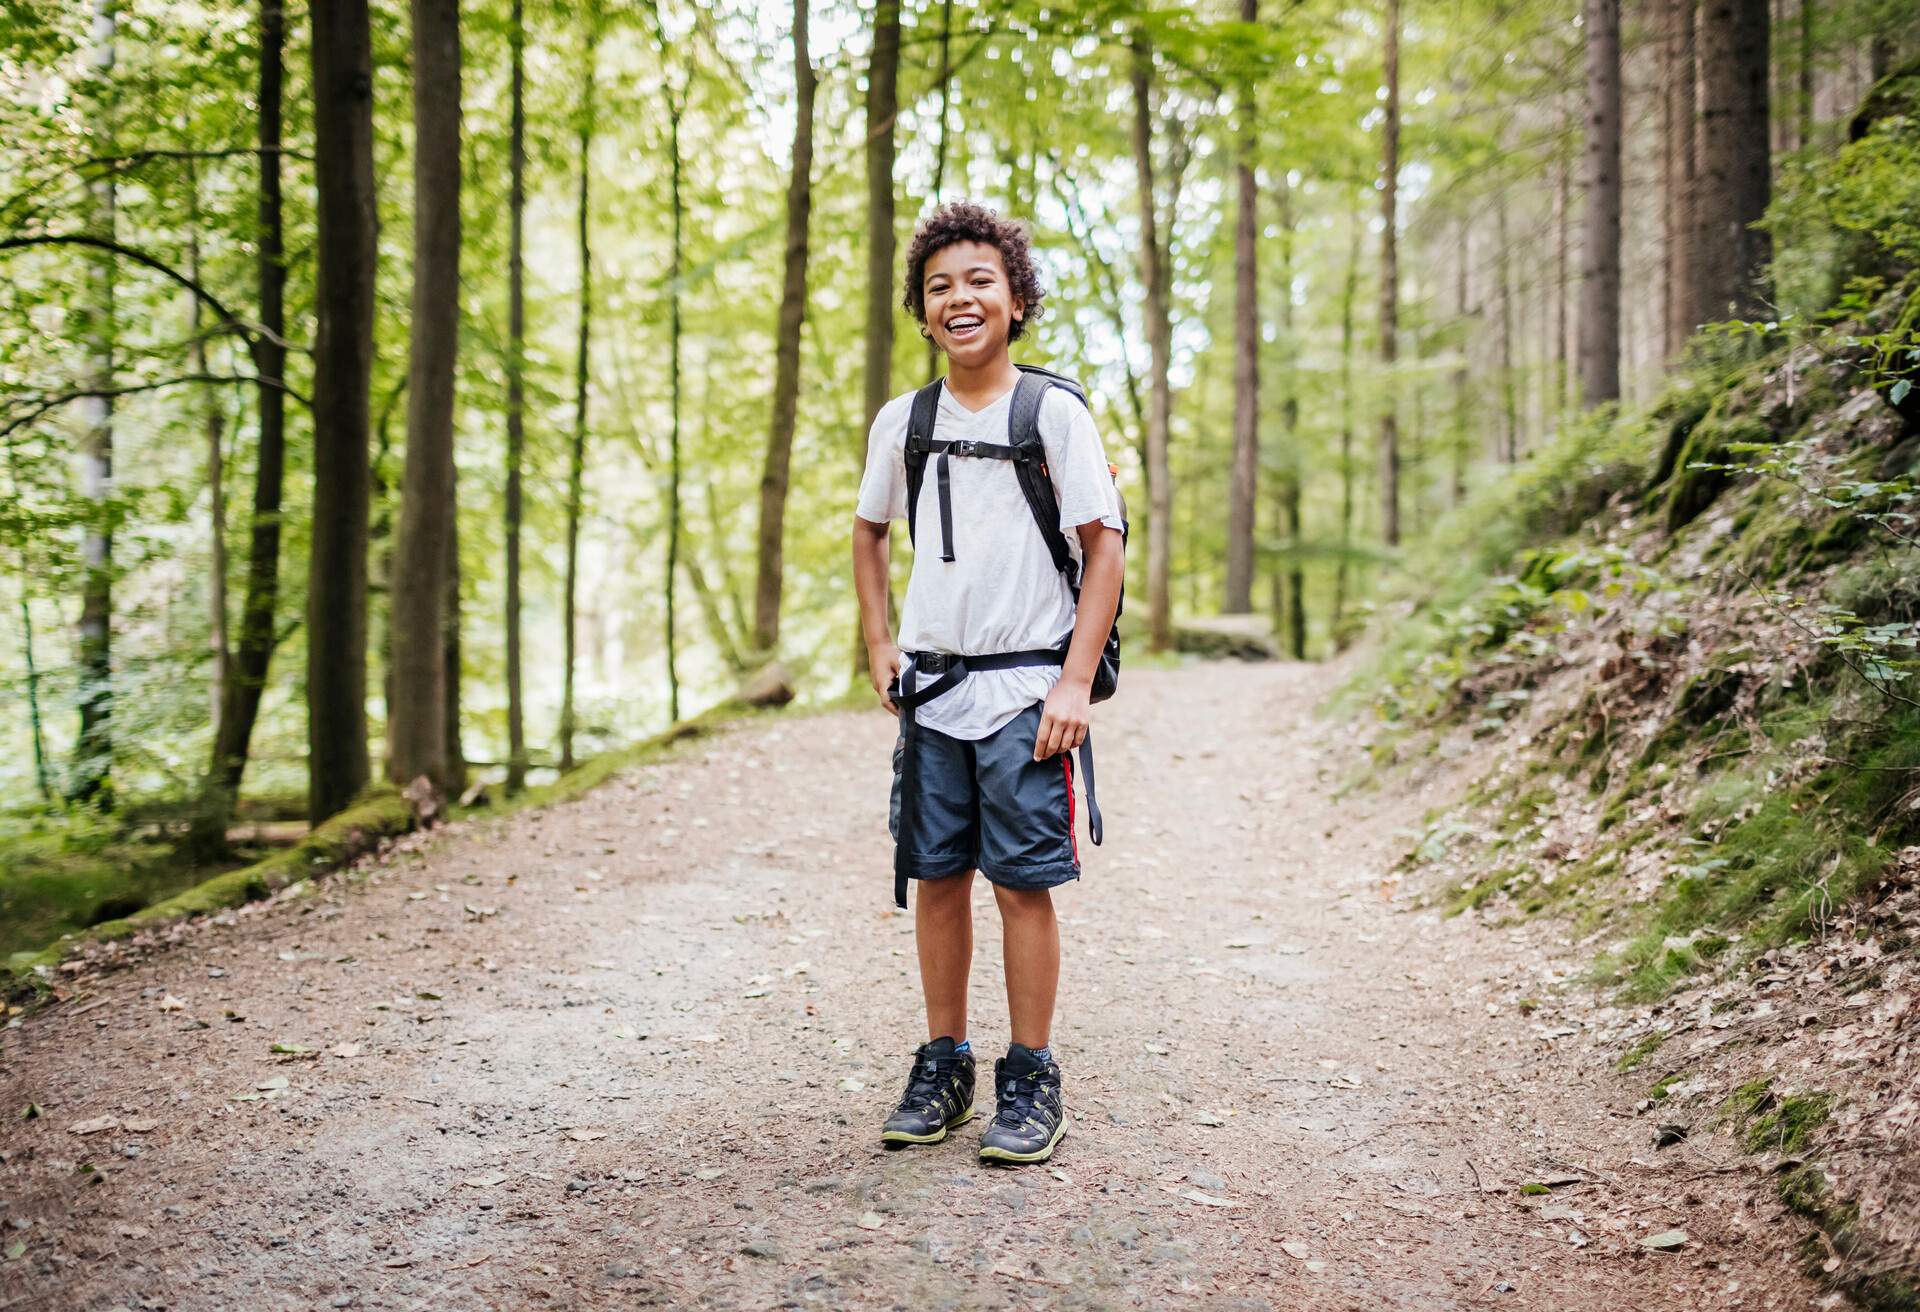 A portrait of a young boy smiling while out hiking a woodland trail in the afternoon.